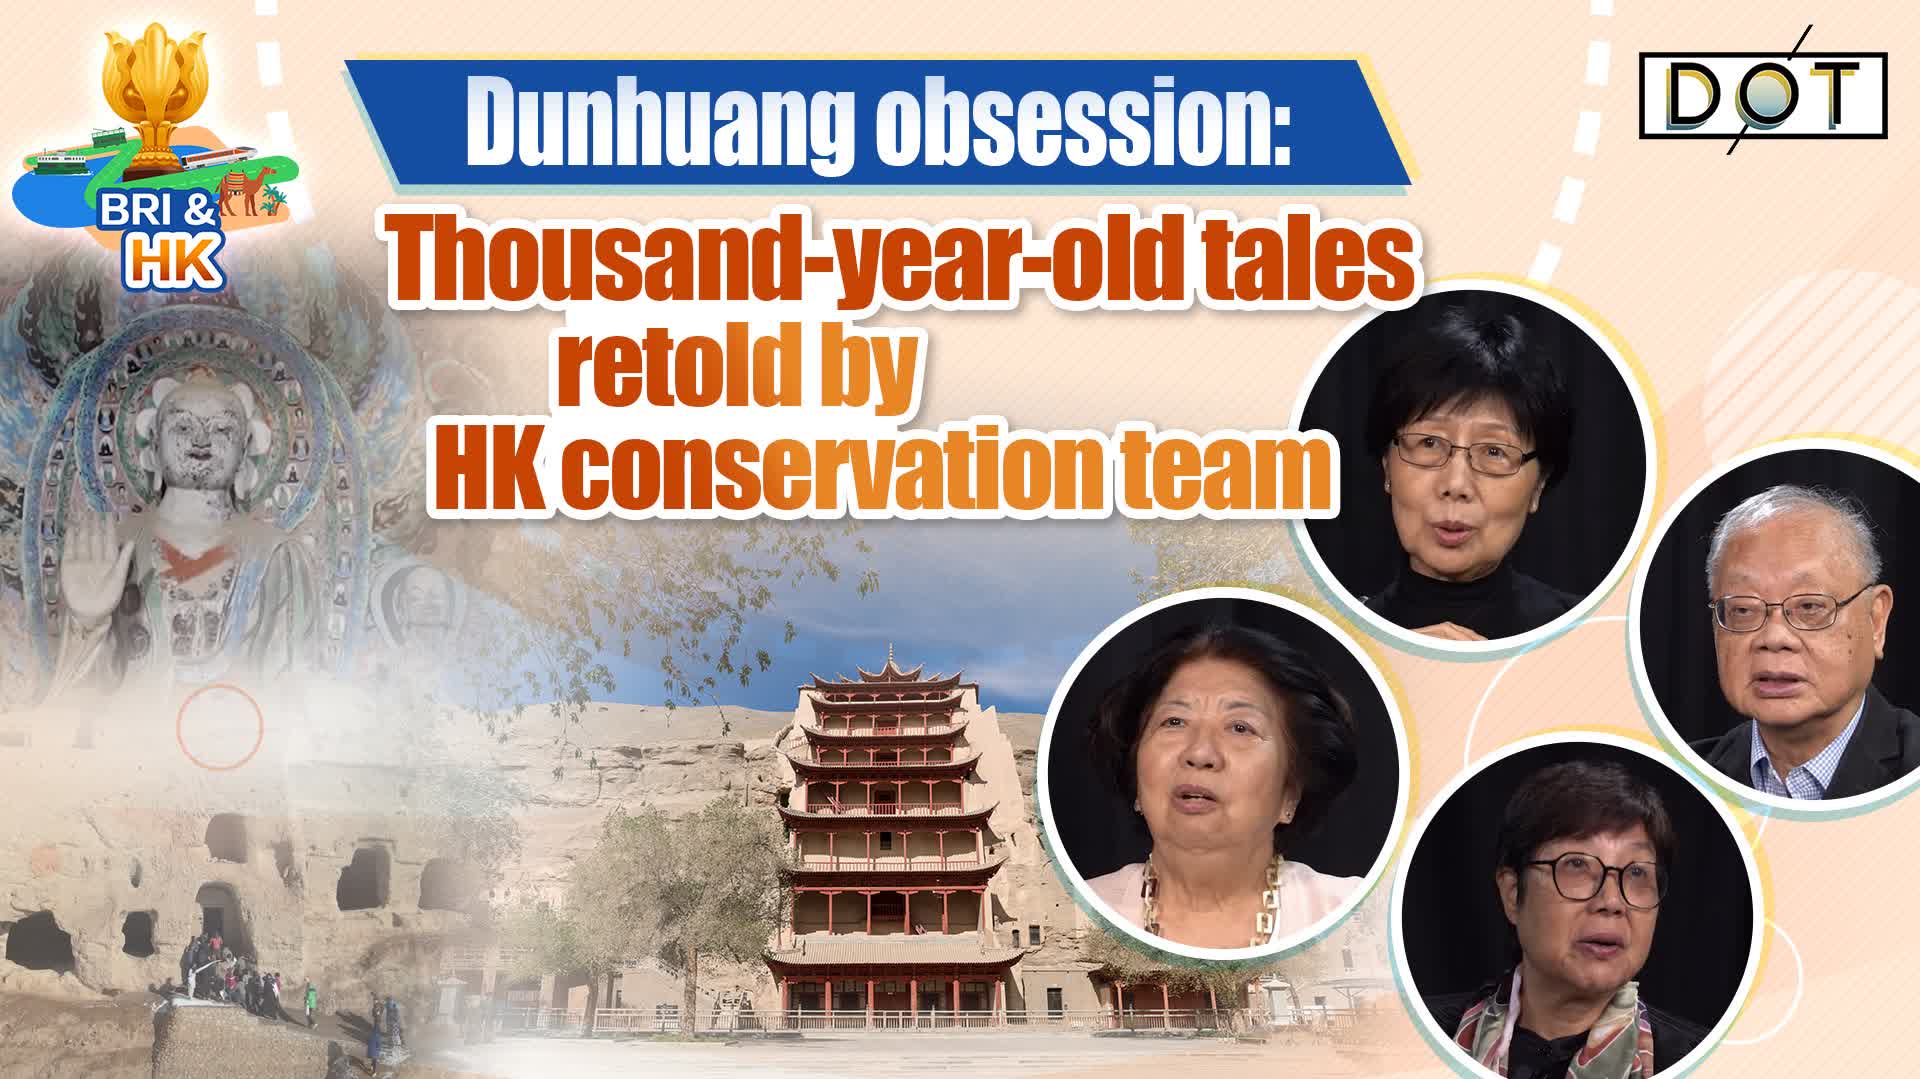 BRI & HK | Dunhuang obsession: Thousand-year-old tales retold by HK conservation team